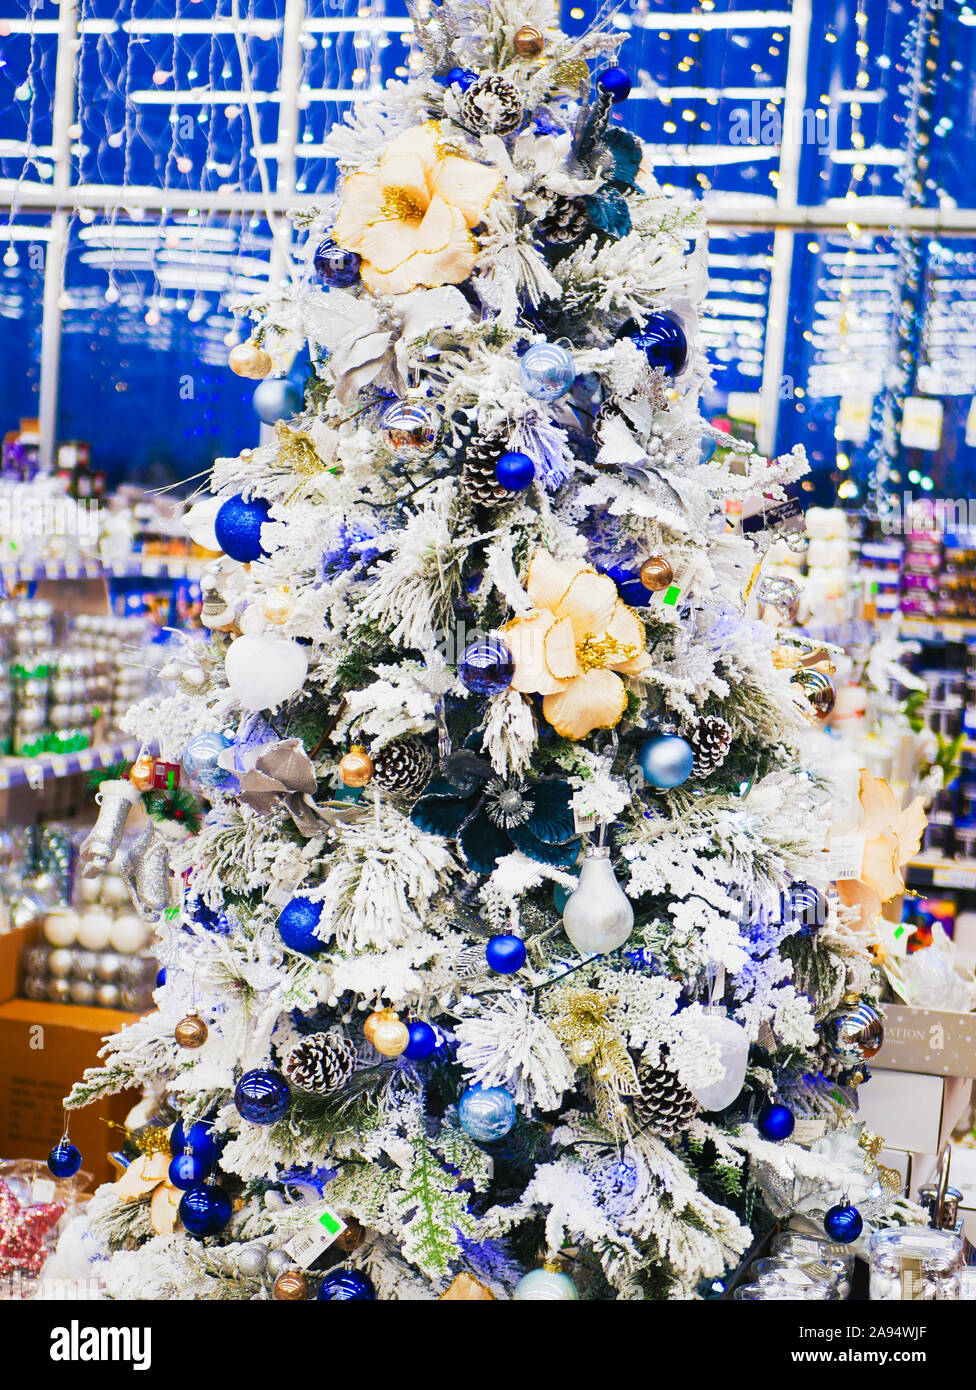 White decorated Christmas tree. White decorated Christmas trees with ...